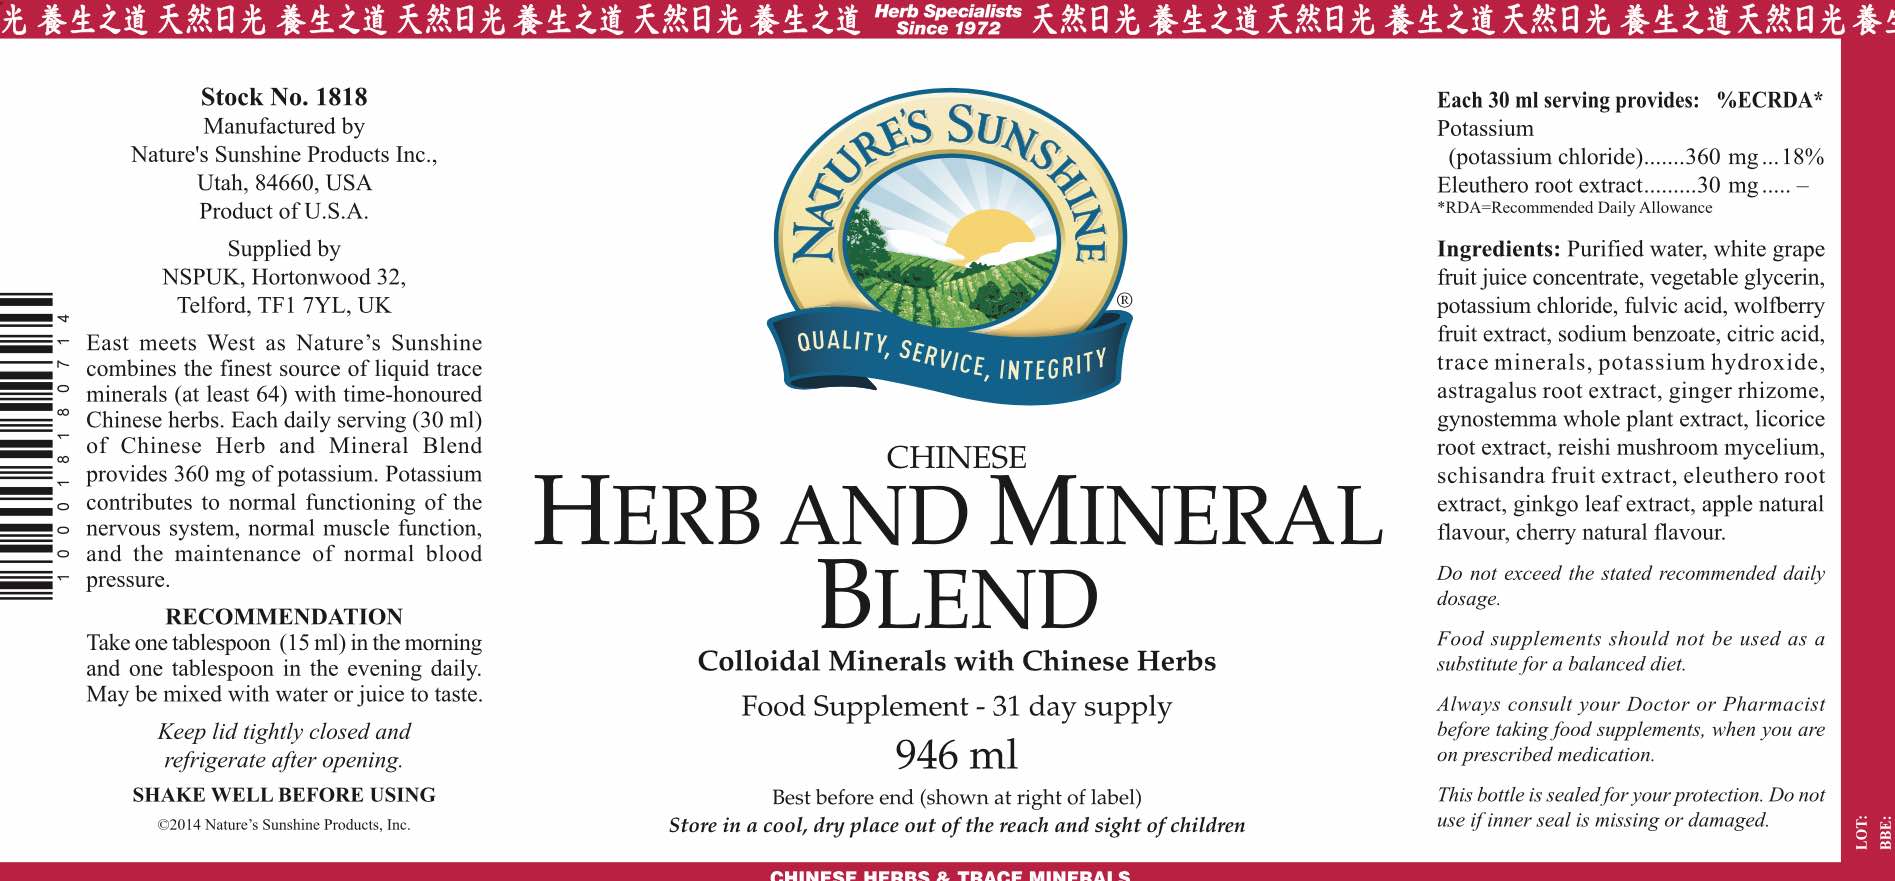 Nature's Sunshine - Chinese Herb and Mineral Blend - Label